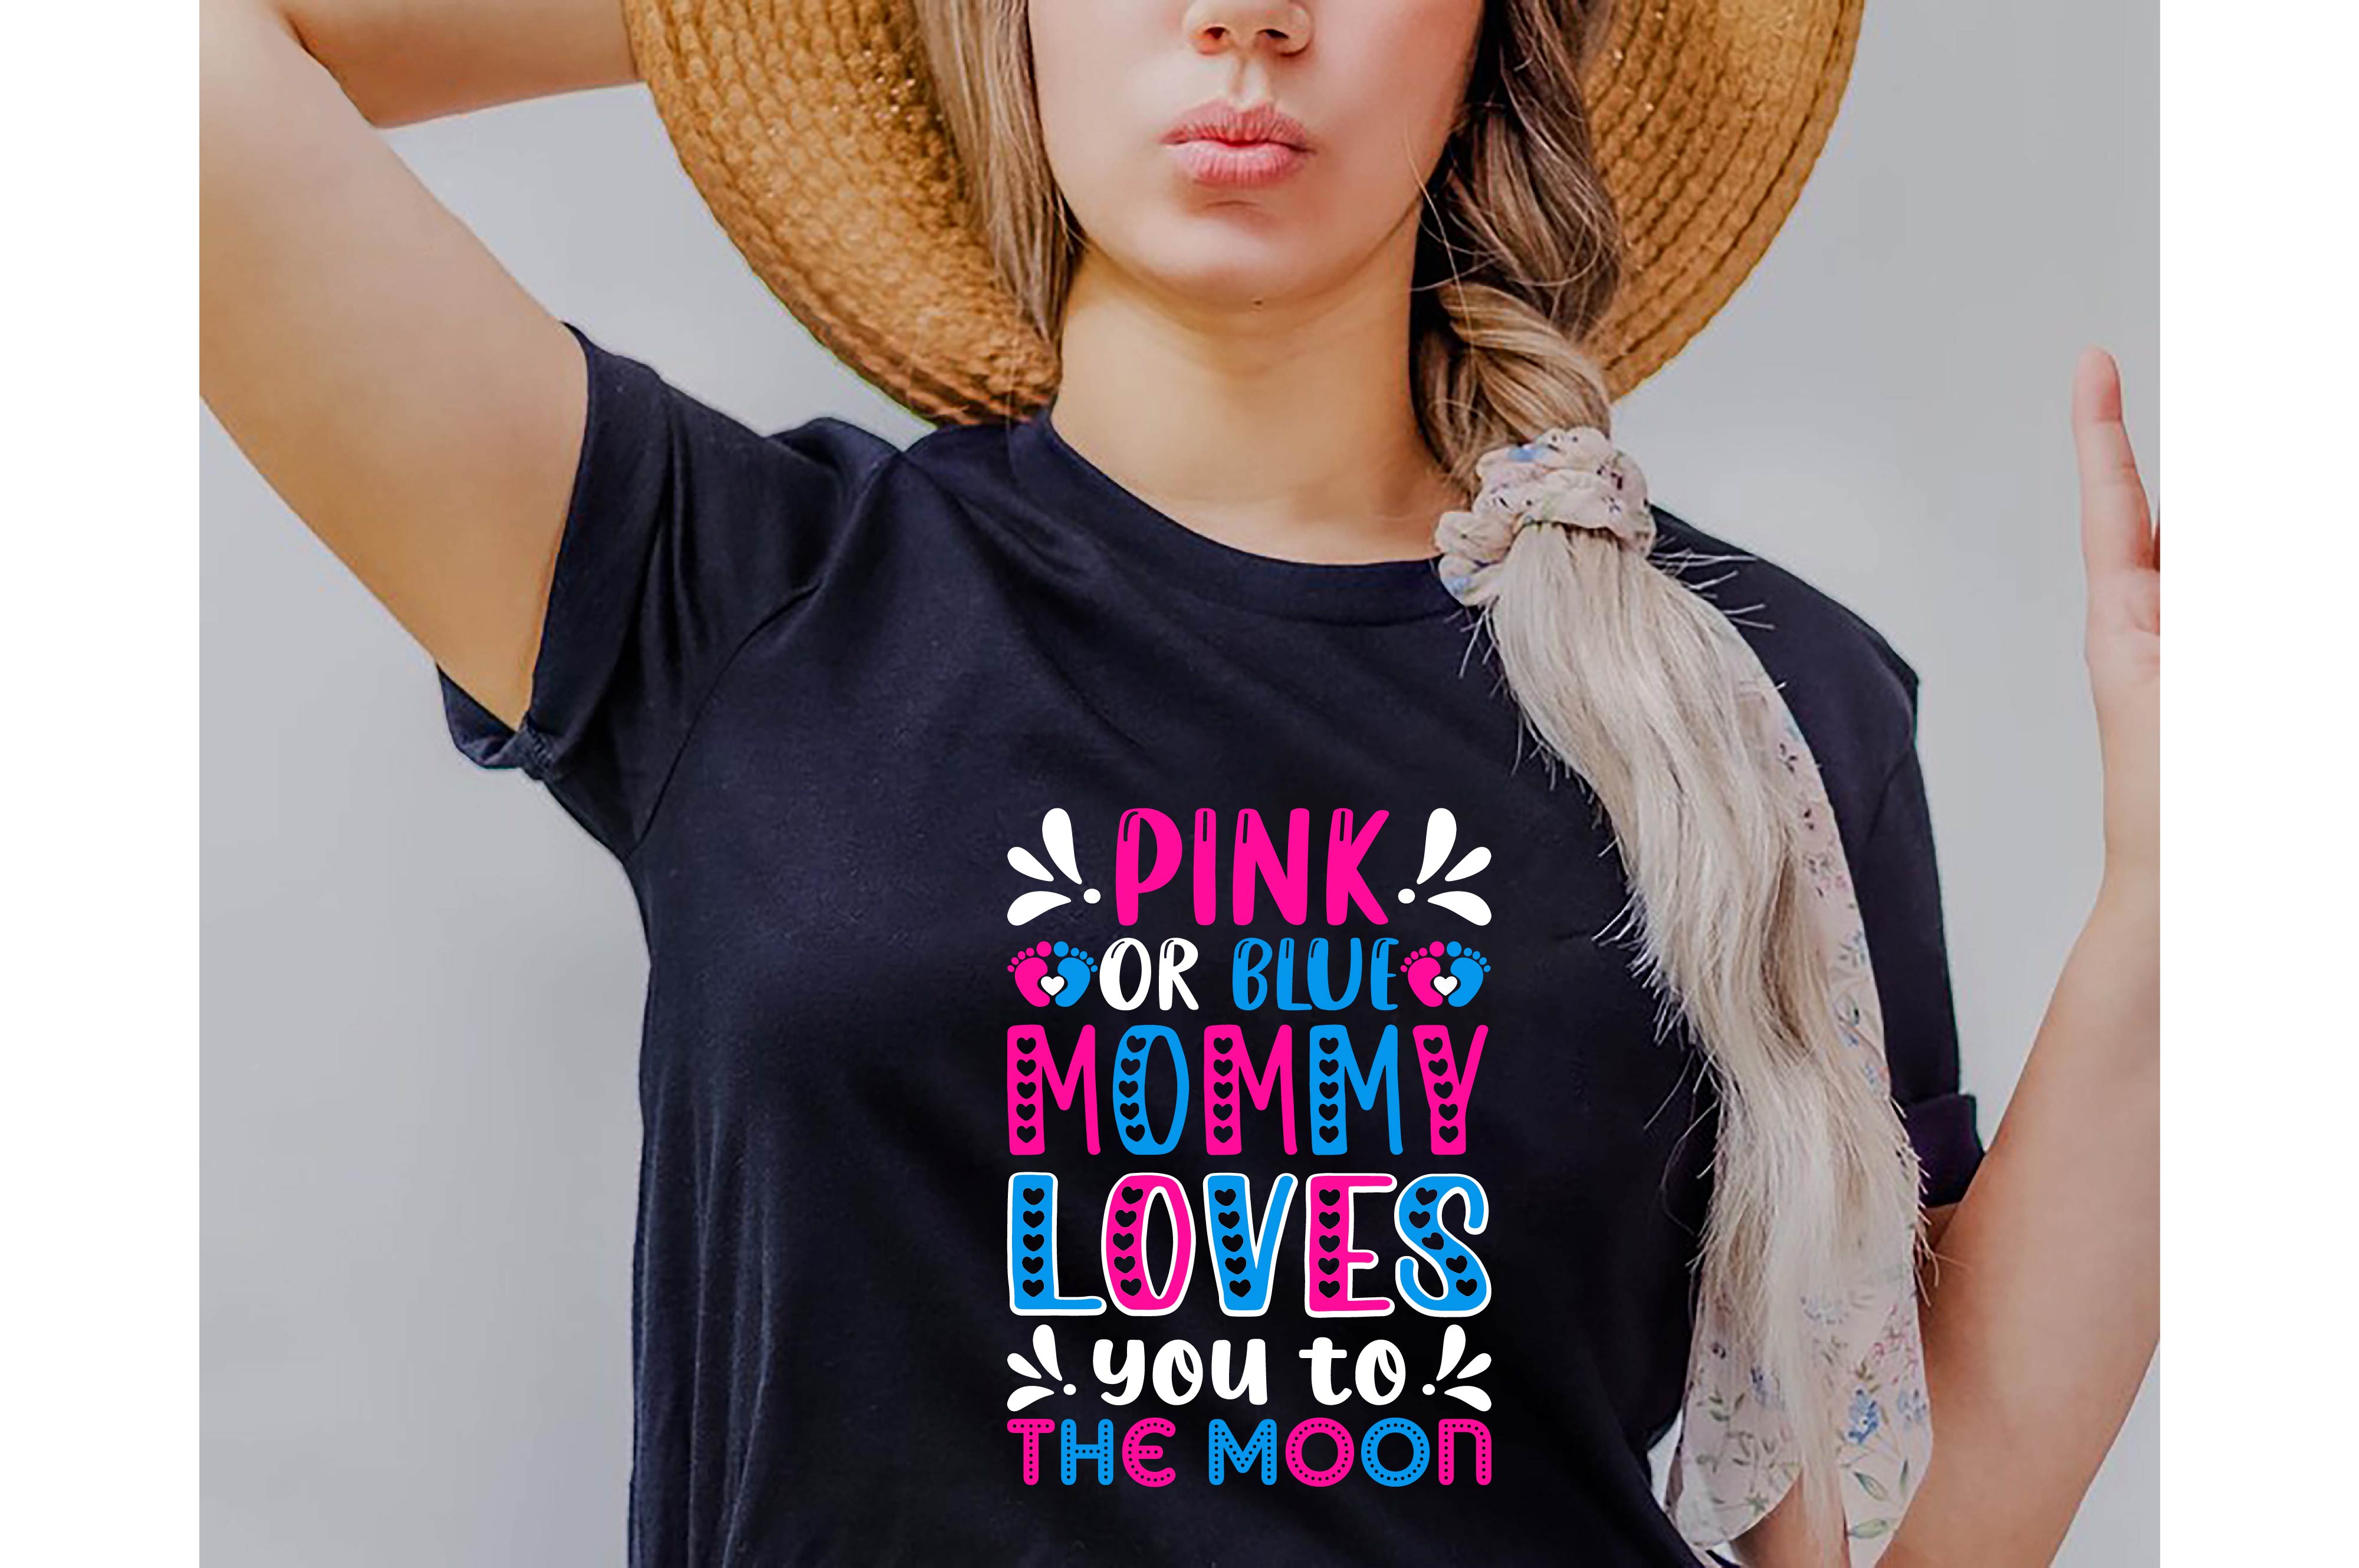 Woman wearing a black shirt with pink or blue lettering on it.